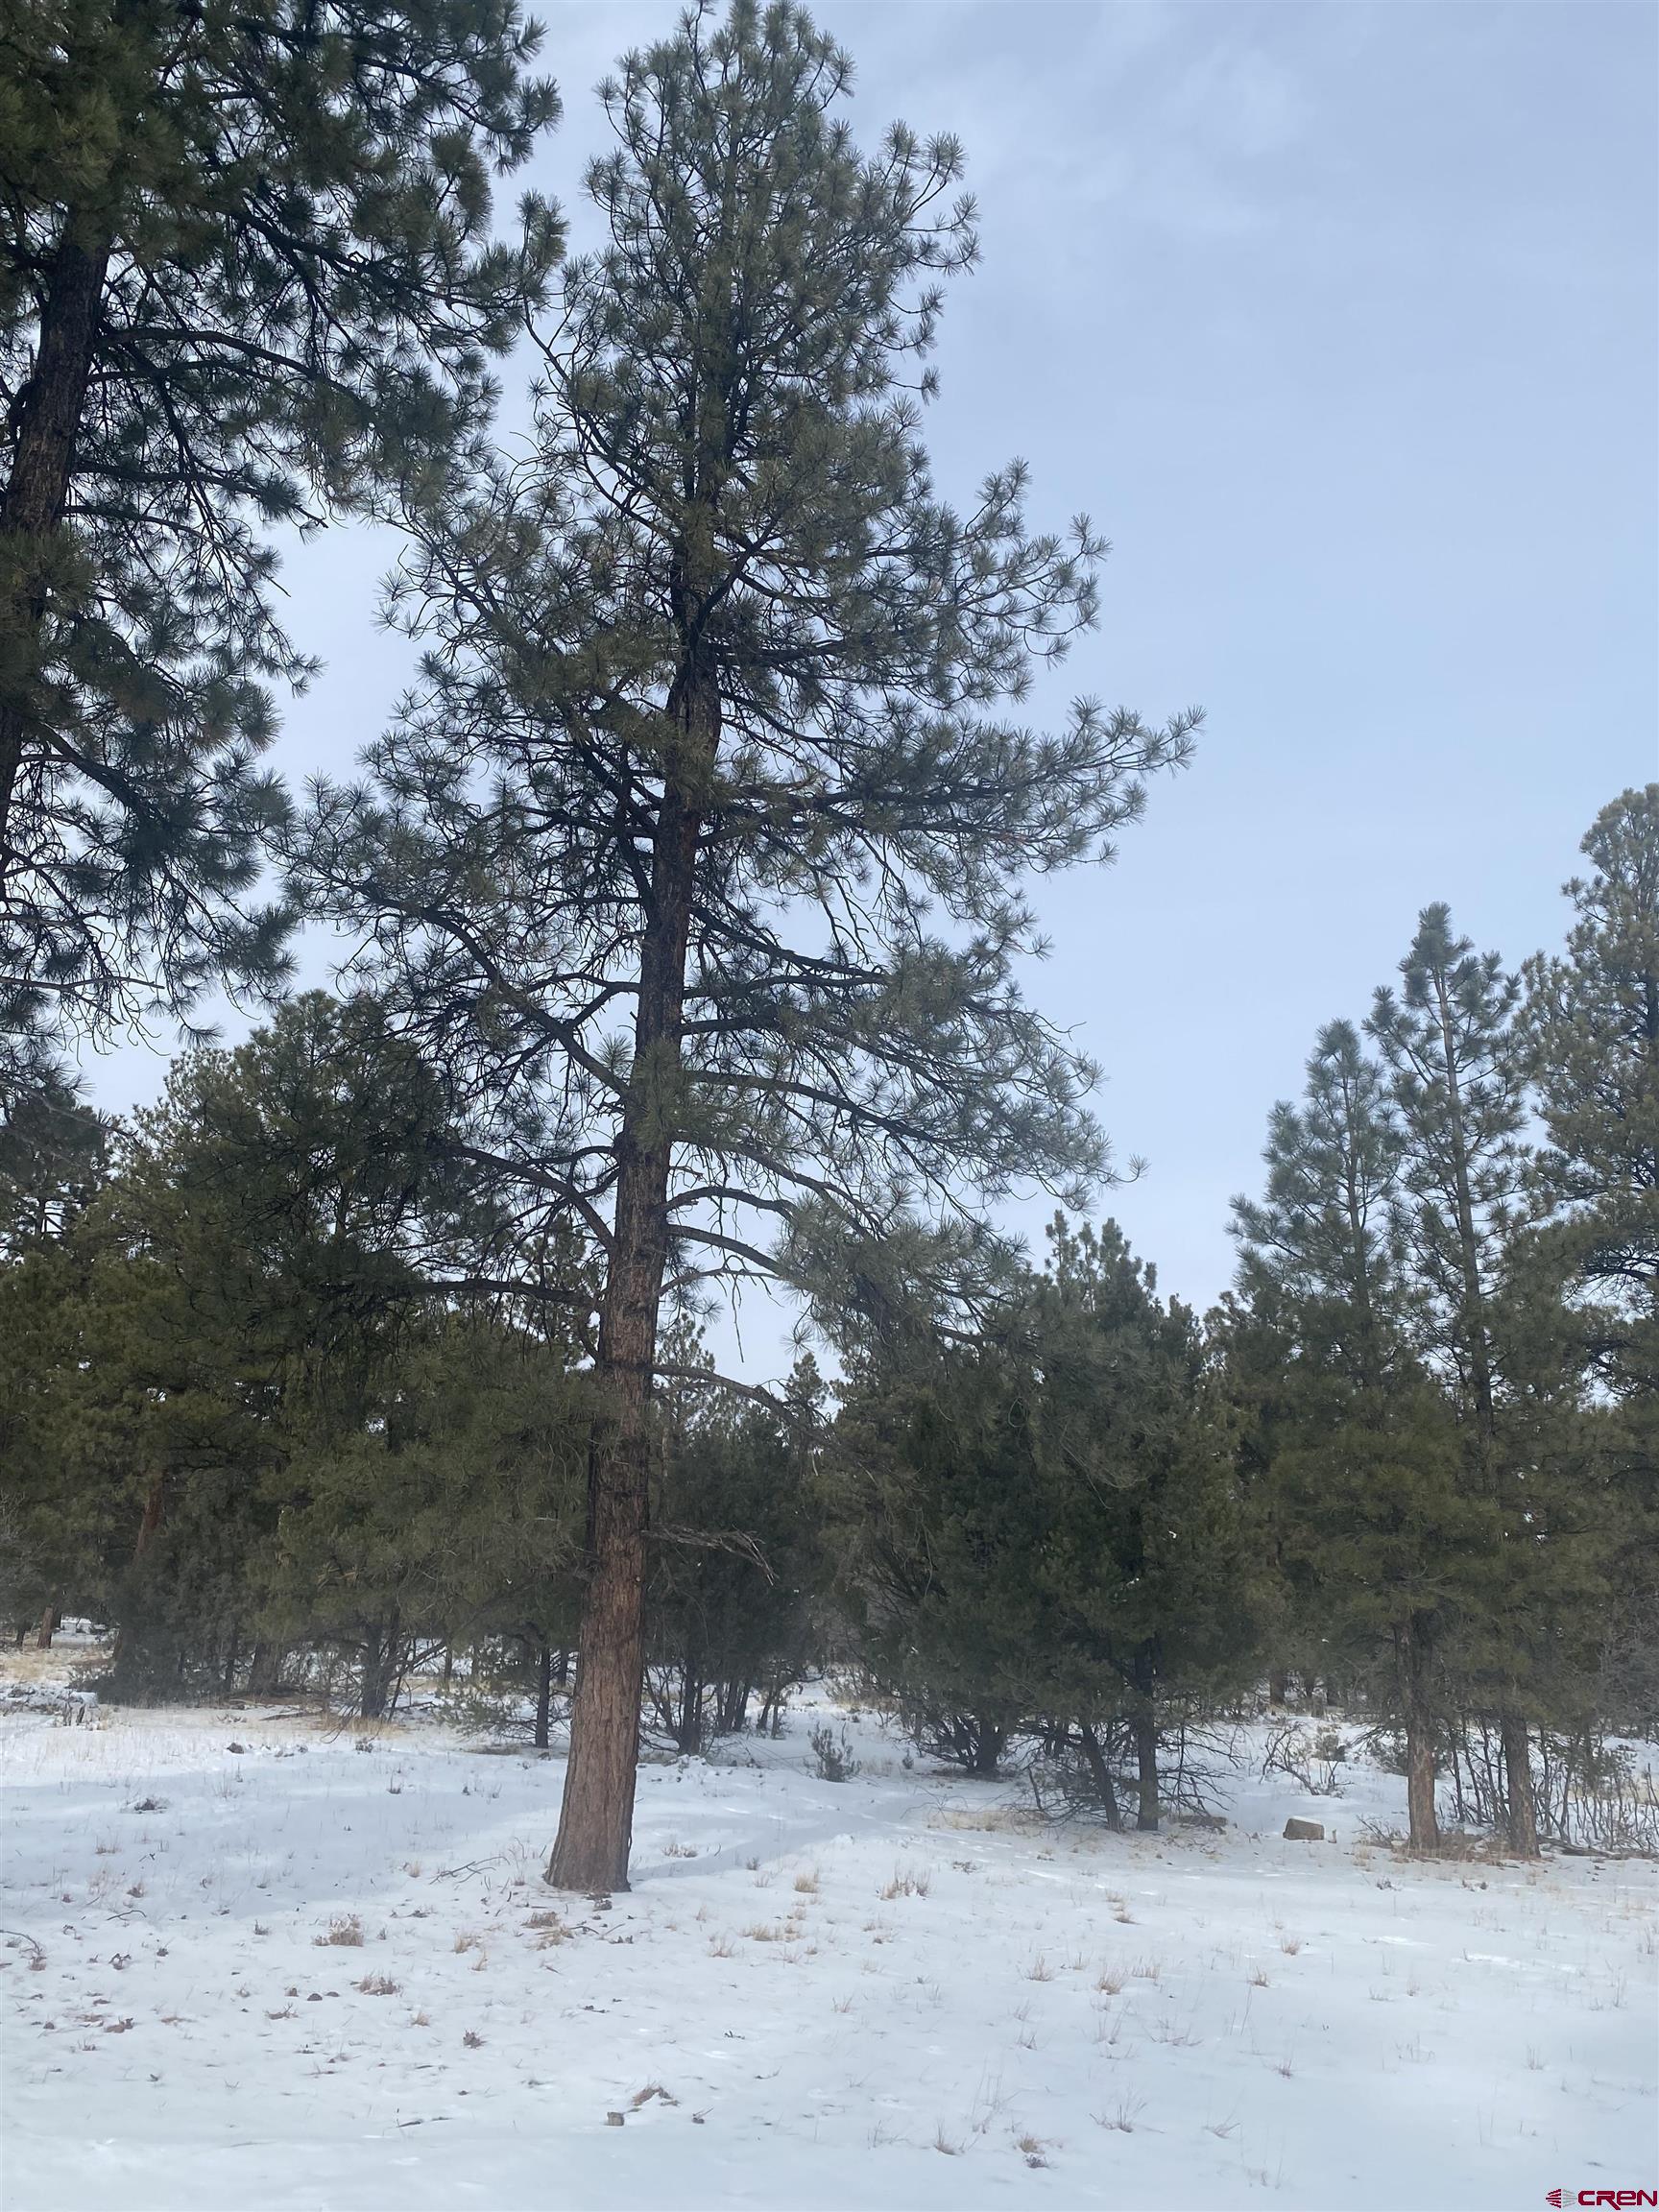 Wonderful lot in Divide Ranch and Club.  Check out the maps in the photos which show the space behind the lot and between the road is ample to not be bothered by traffic on the road.  Water tap is PAID- a current value of $14,000!!  All utilities are at the lot line with paved roads throughout the subdivision. Buyer can apply to become a part of the Sanitation District in order to obtain a sewer tap.   There are homes built on the surrounding lots for the most part so once your dream home is built, you shouldn't have to deal with construction around you.  Lot is on the exterior portion of the subdivision so you don't have to worry about flying golf balls hitting your windows from the fairway but still enjoy the amenities of this great community. This great location is close to the club house too so you can go and enjoy a happy hour cocktail with the neighbors.  Pretty Ponderosa Pine trees abound offering shade and relief from the hot summer sun.  Level lot just waiting for your dream home!  Private and peaceful yet just 10 minutes to the Town of Ridgway, 30 minutes to Montrose with the recently improved Regional Airport and 45 minutes to world class skiing in Telluride. Come realize your dream of owning property and building a home in Southwestern Colorado!